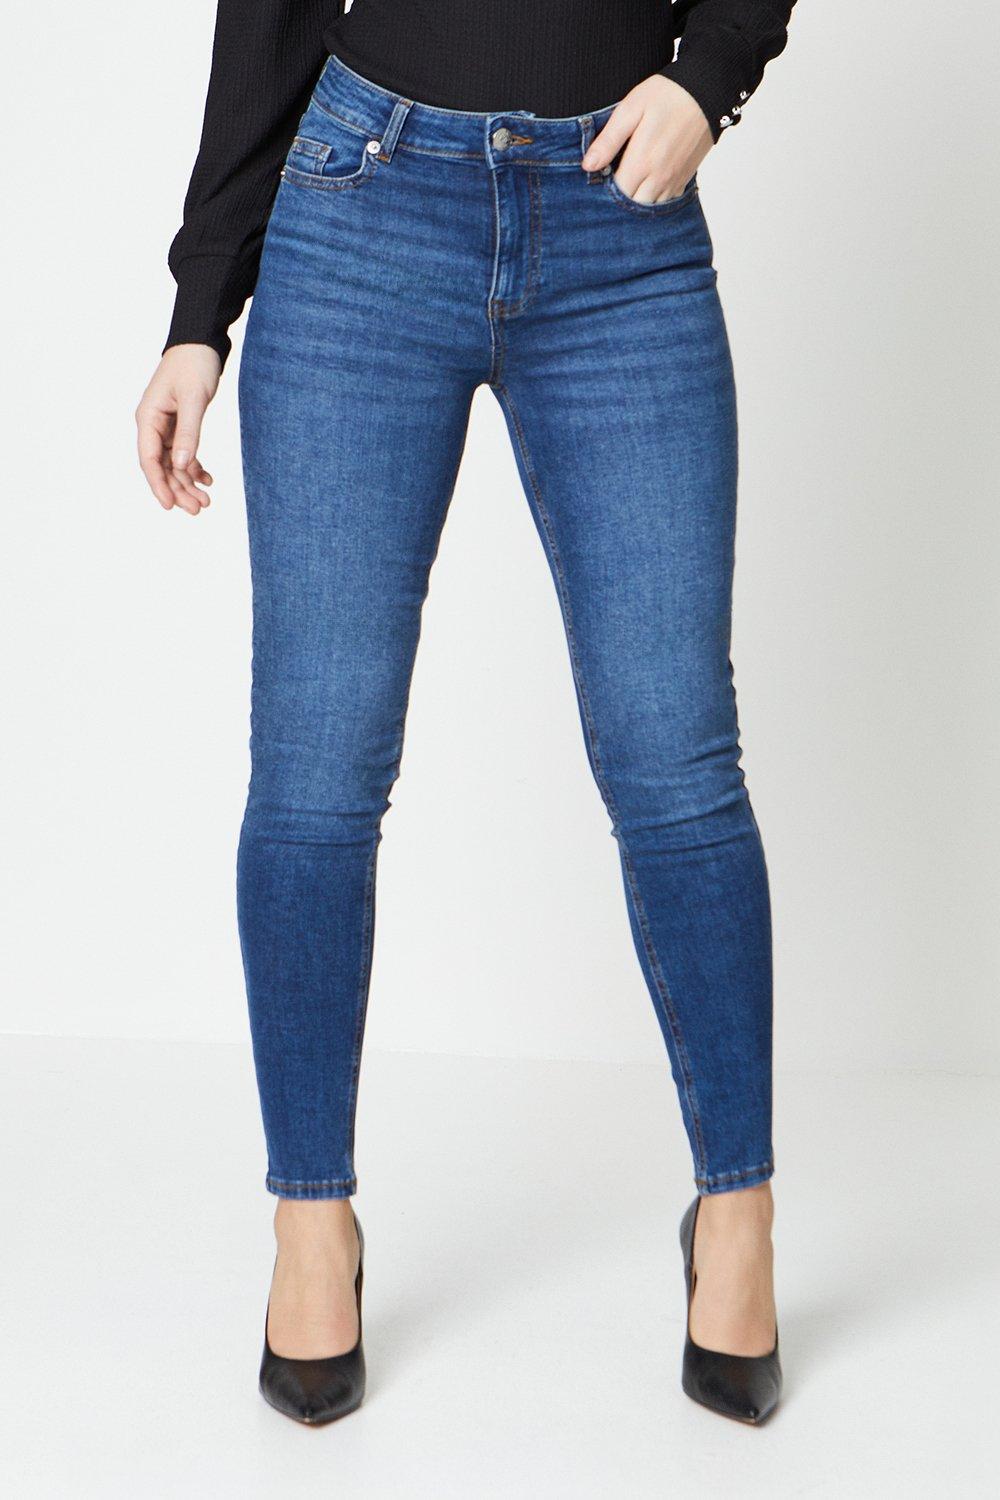 Women's High Rise Skinny Jeans - mid wash - 16